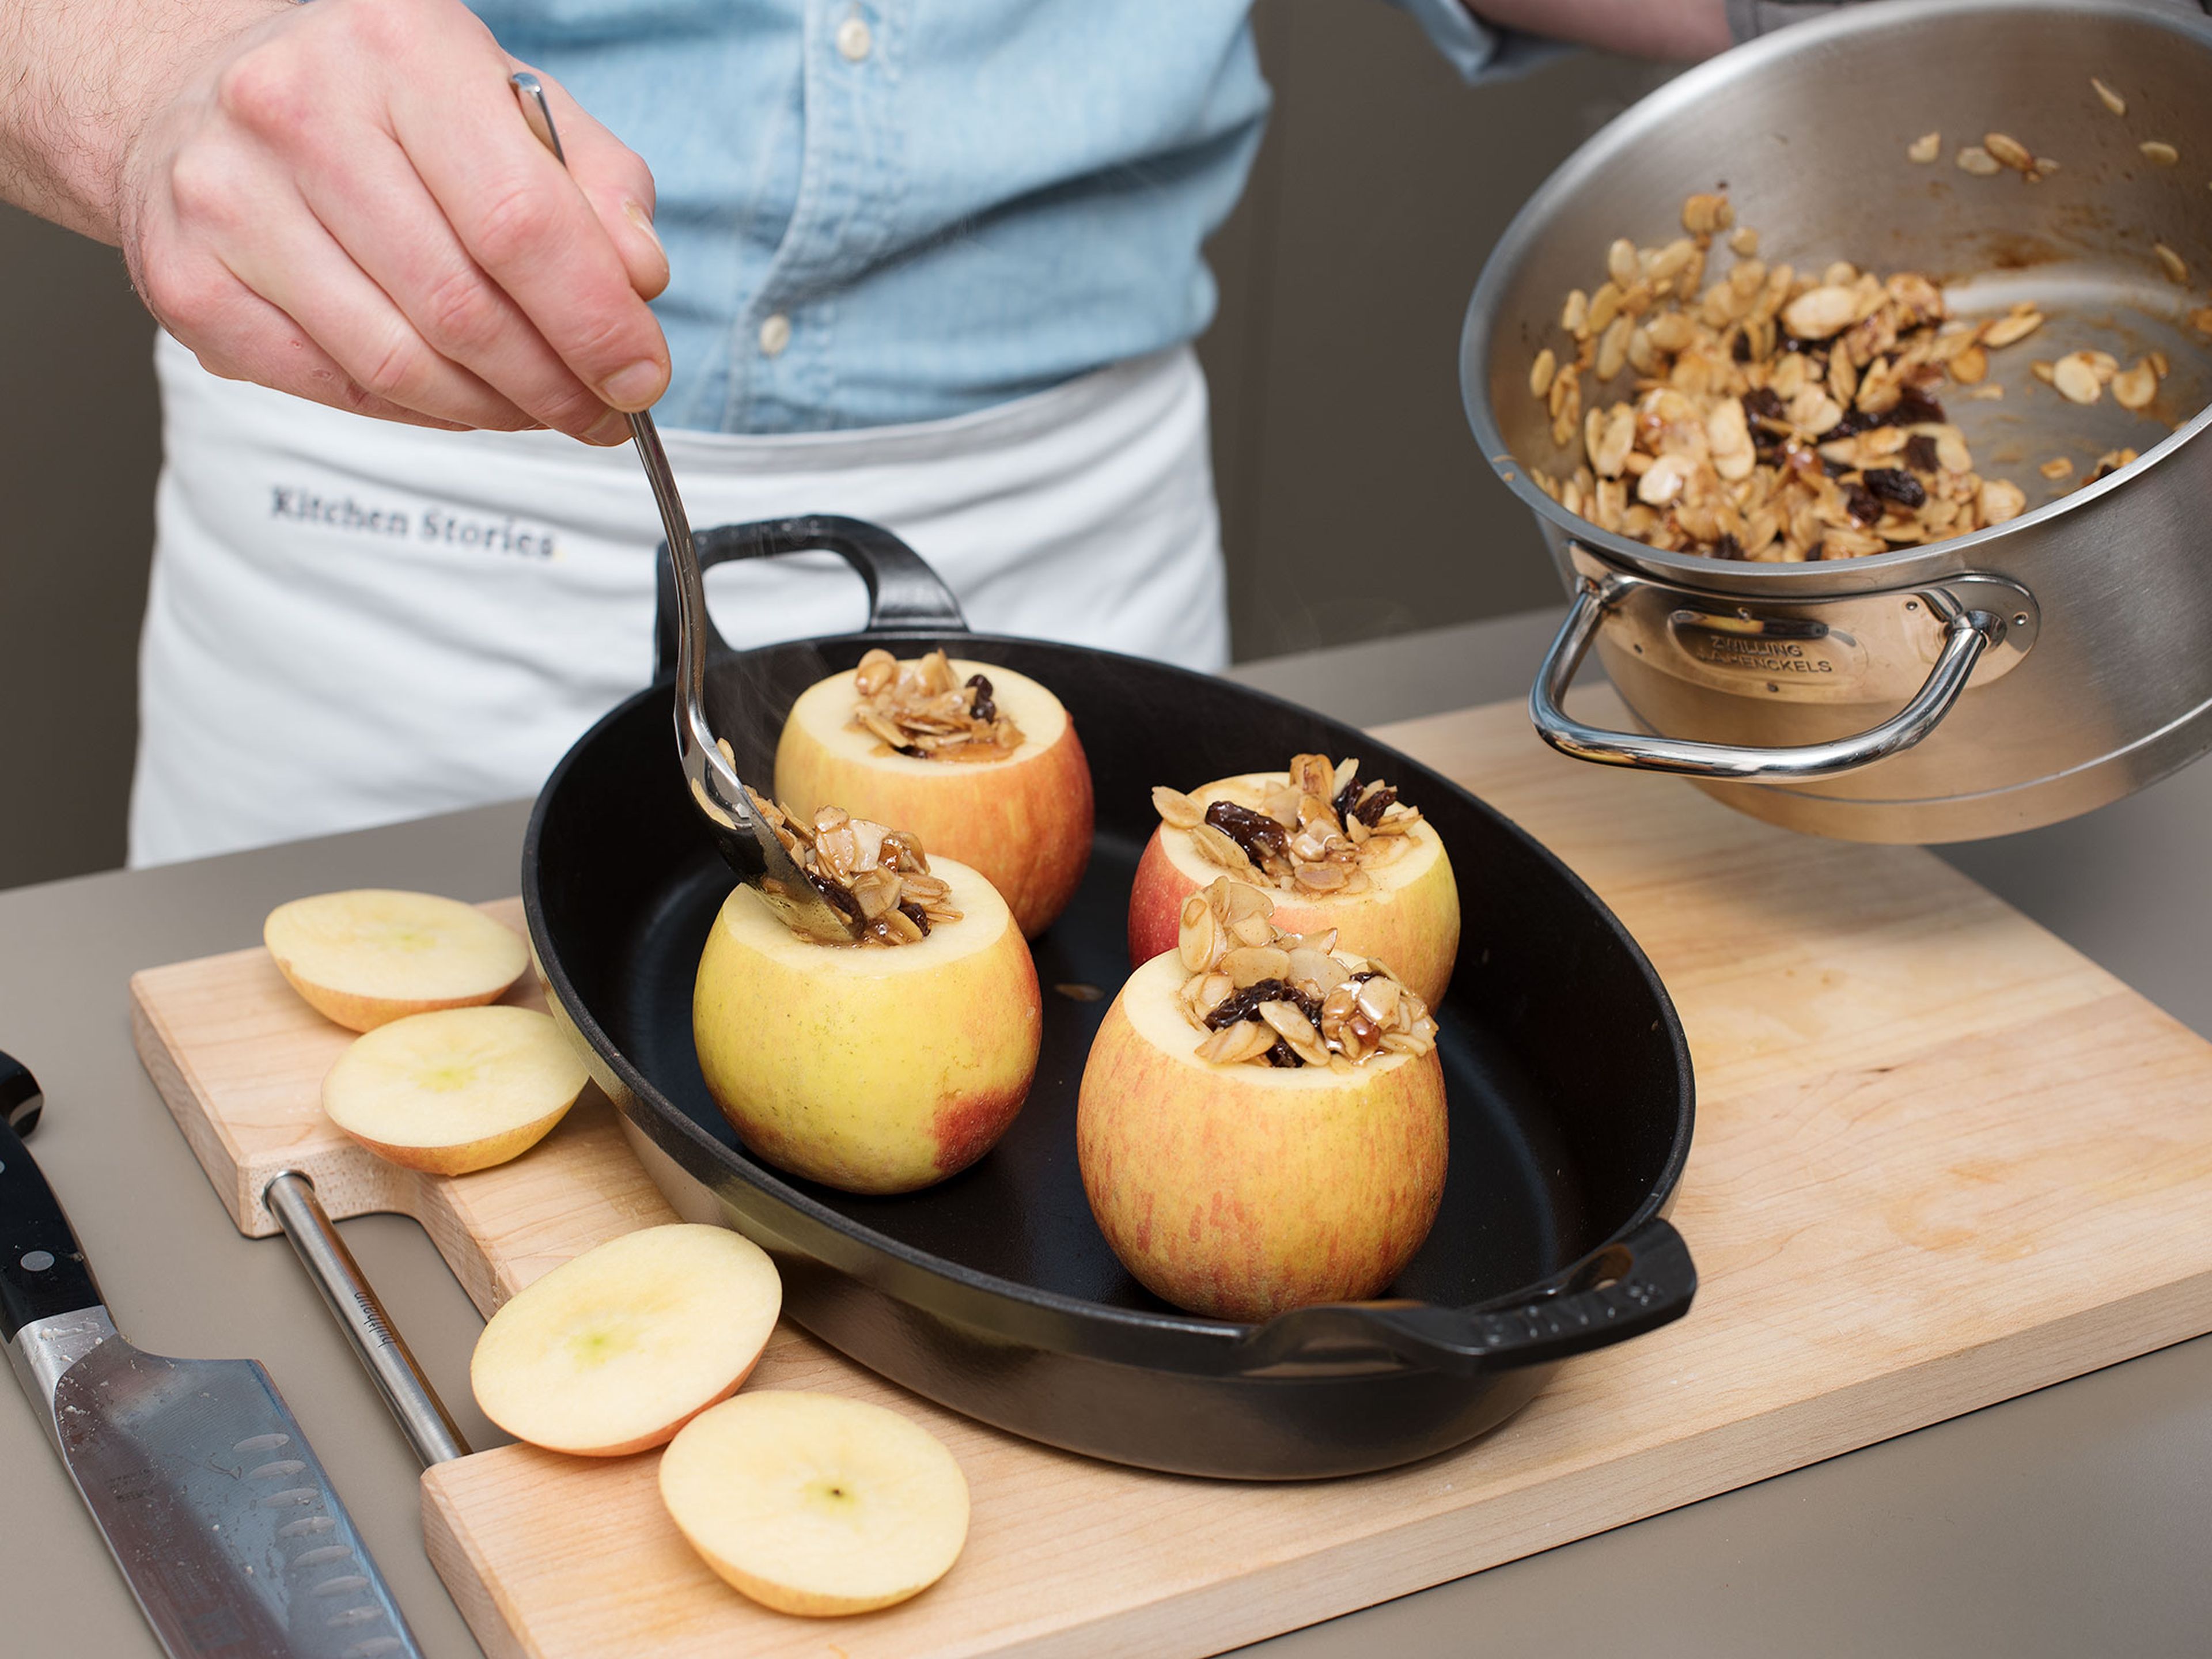 Place apples on a baking dish and stuff with almond-raisin mixture. Transfer to the oven at 120°C/250°F for approx. 30 min.